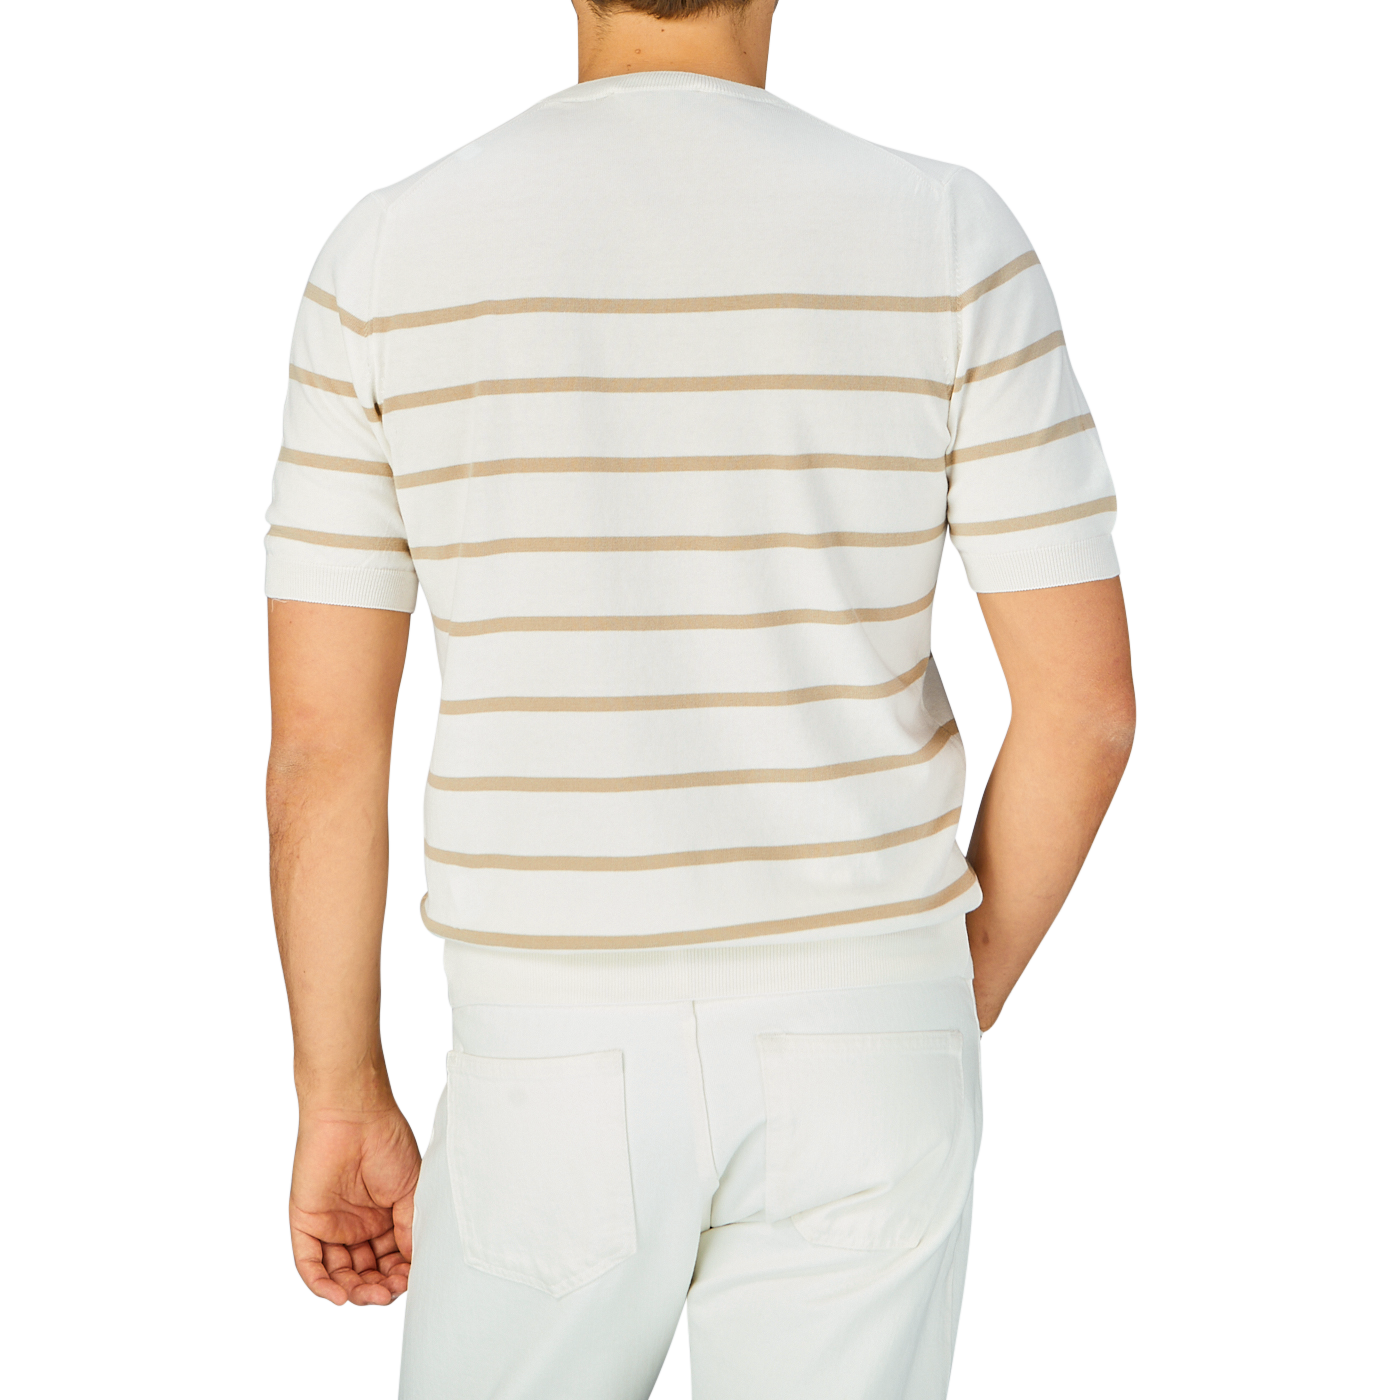 Man standing with his back to the camera wearing a Gran Sasso Cream Beige Striped Organic Cotton T-Shirt and white pants.